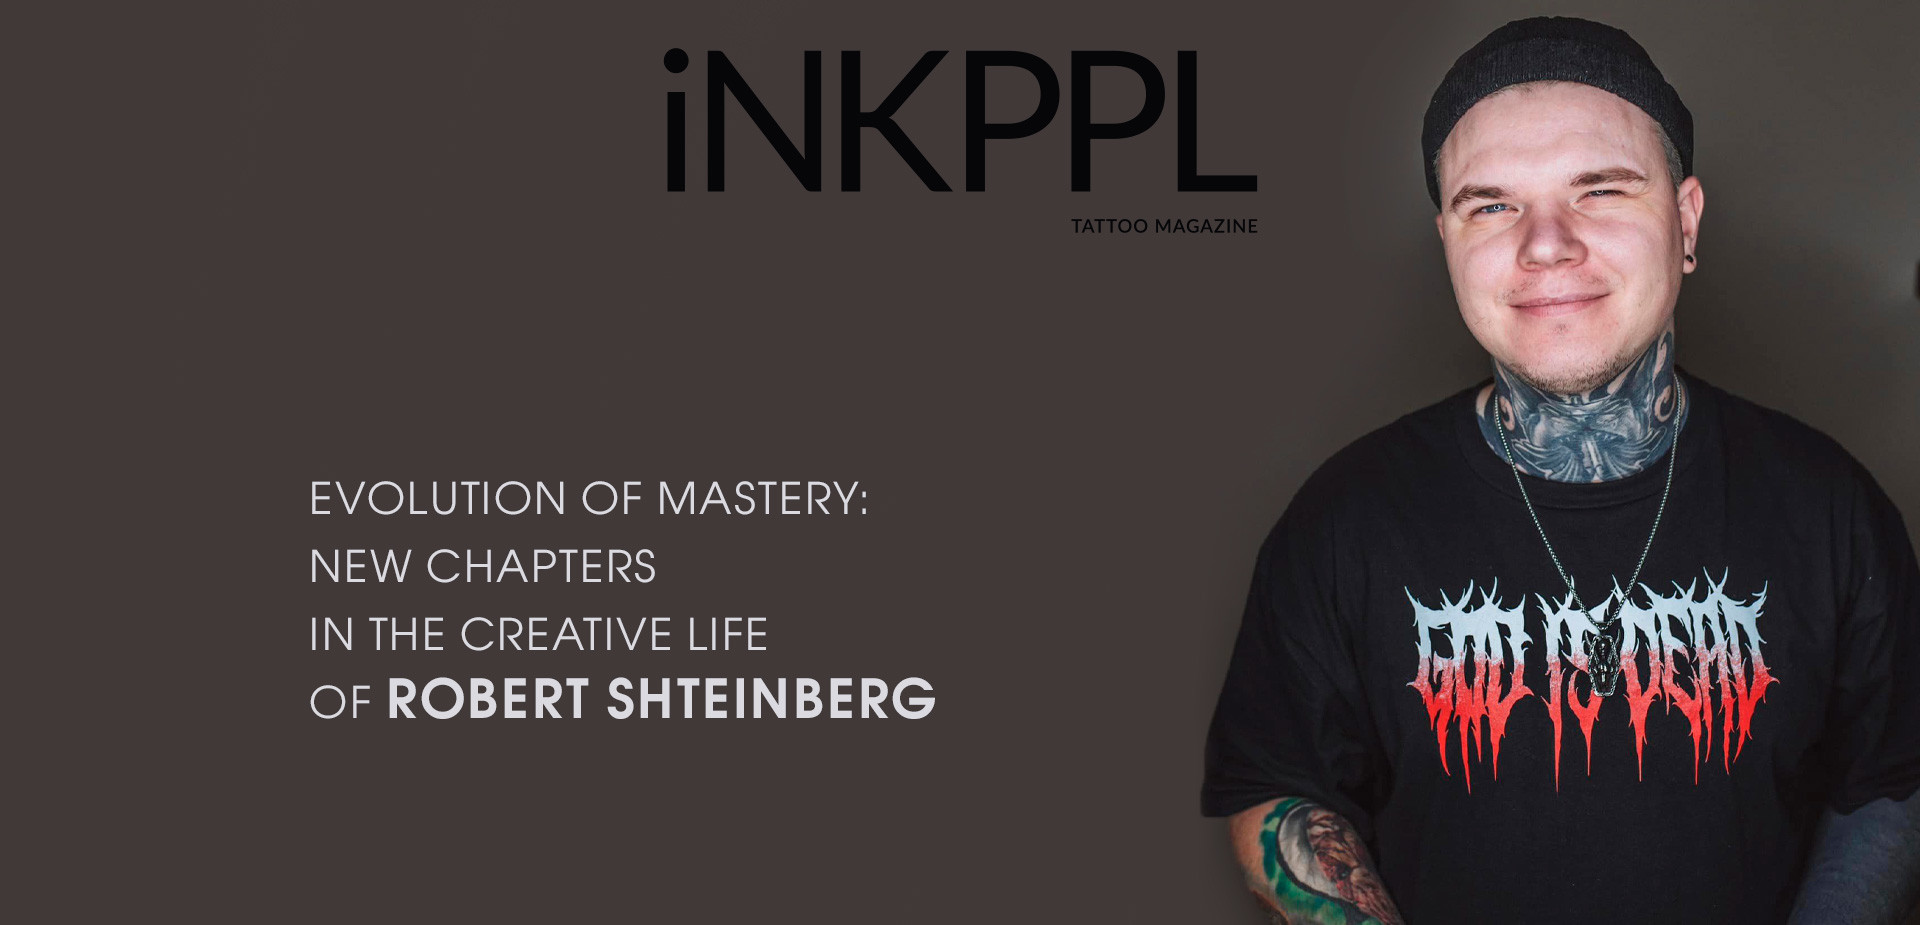 Evolution of Mastery: New Chapters in the Creative Life of Robert Shteinberg